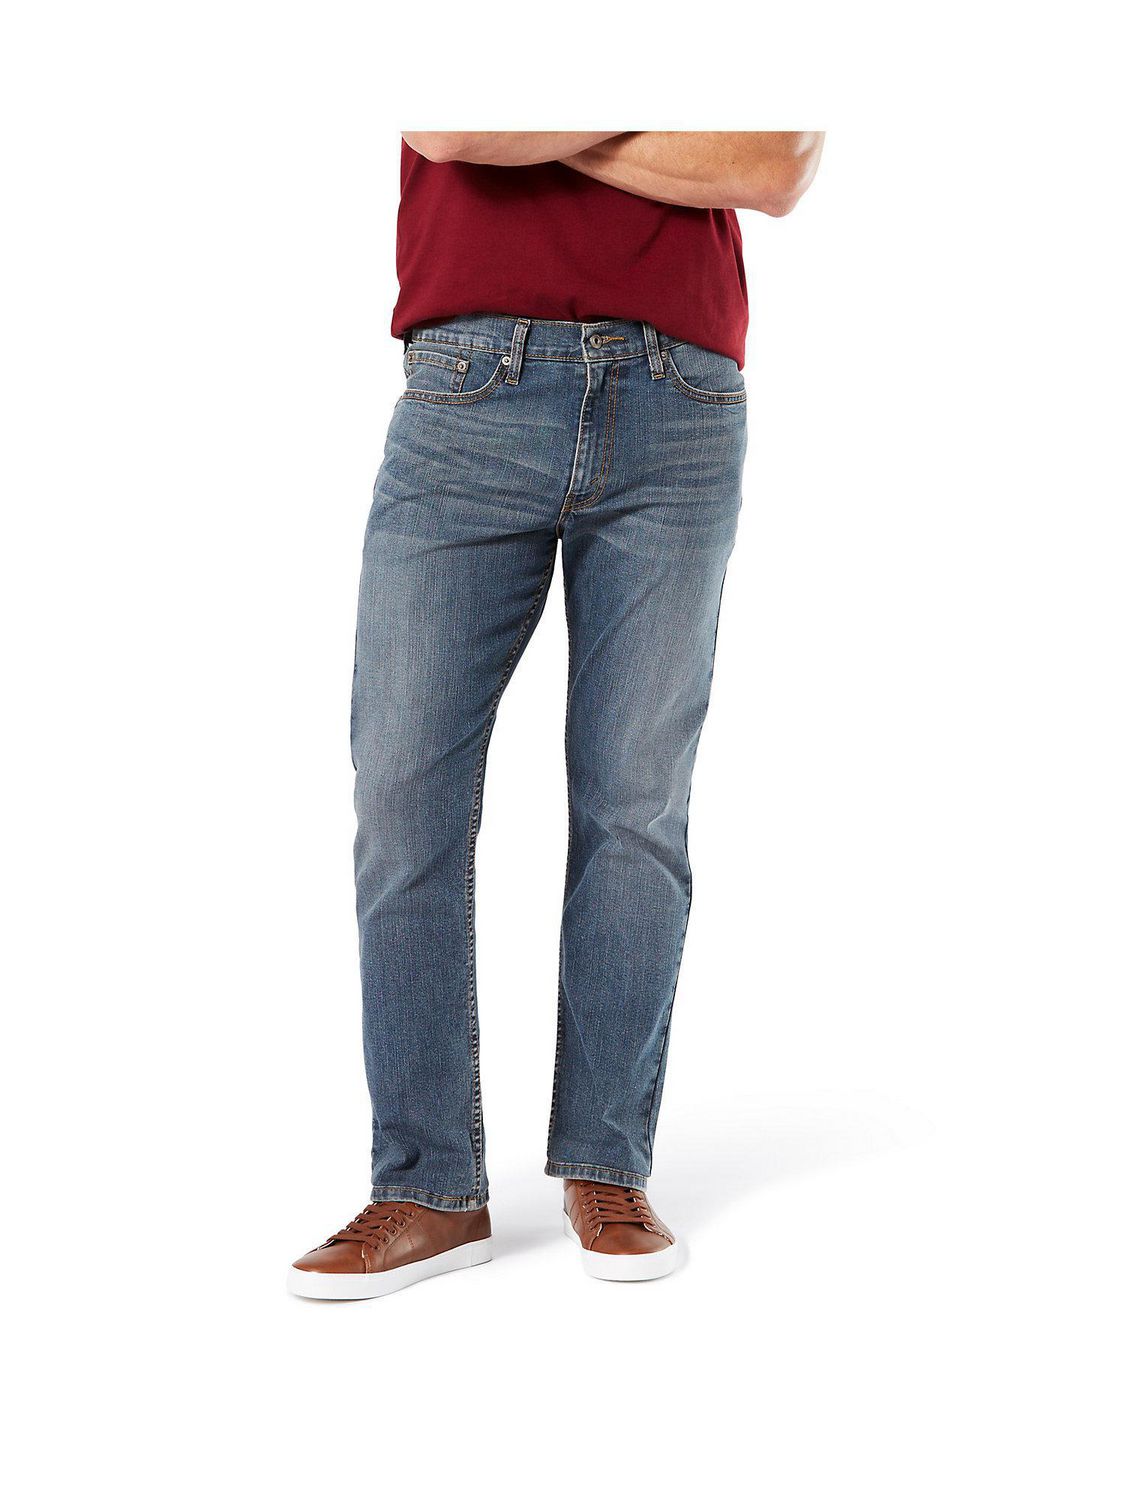 Signature by Levi Strauss & Co.™ Men's Straight Jeans | Walmart Canada